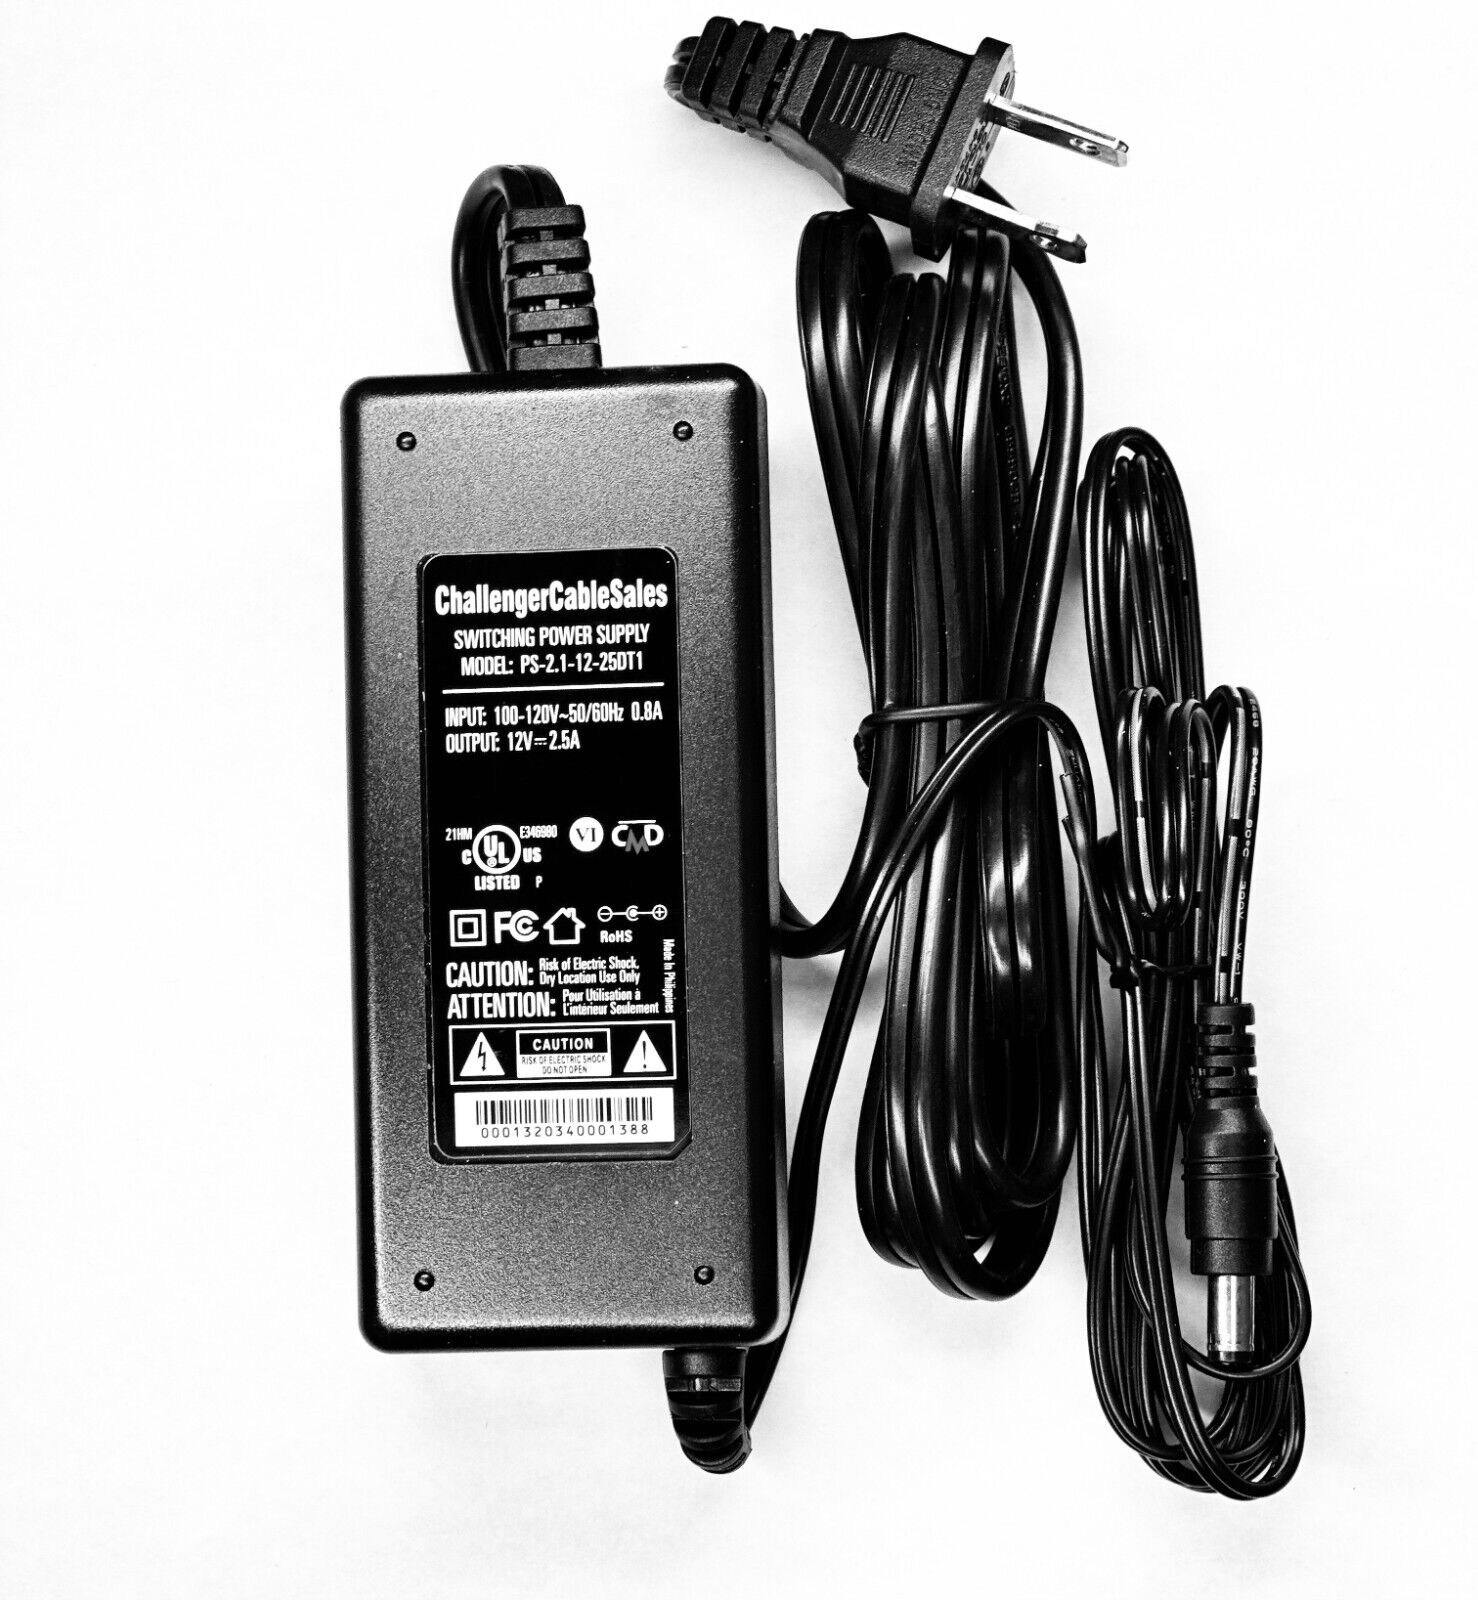 Challenger Cable Sales Switching Power Supply Adapter PS-2.1-12-25DT1 12V 2.5A Brand I.T.E POWER SUPPLY Type Switching